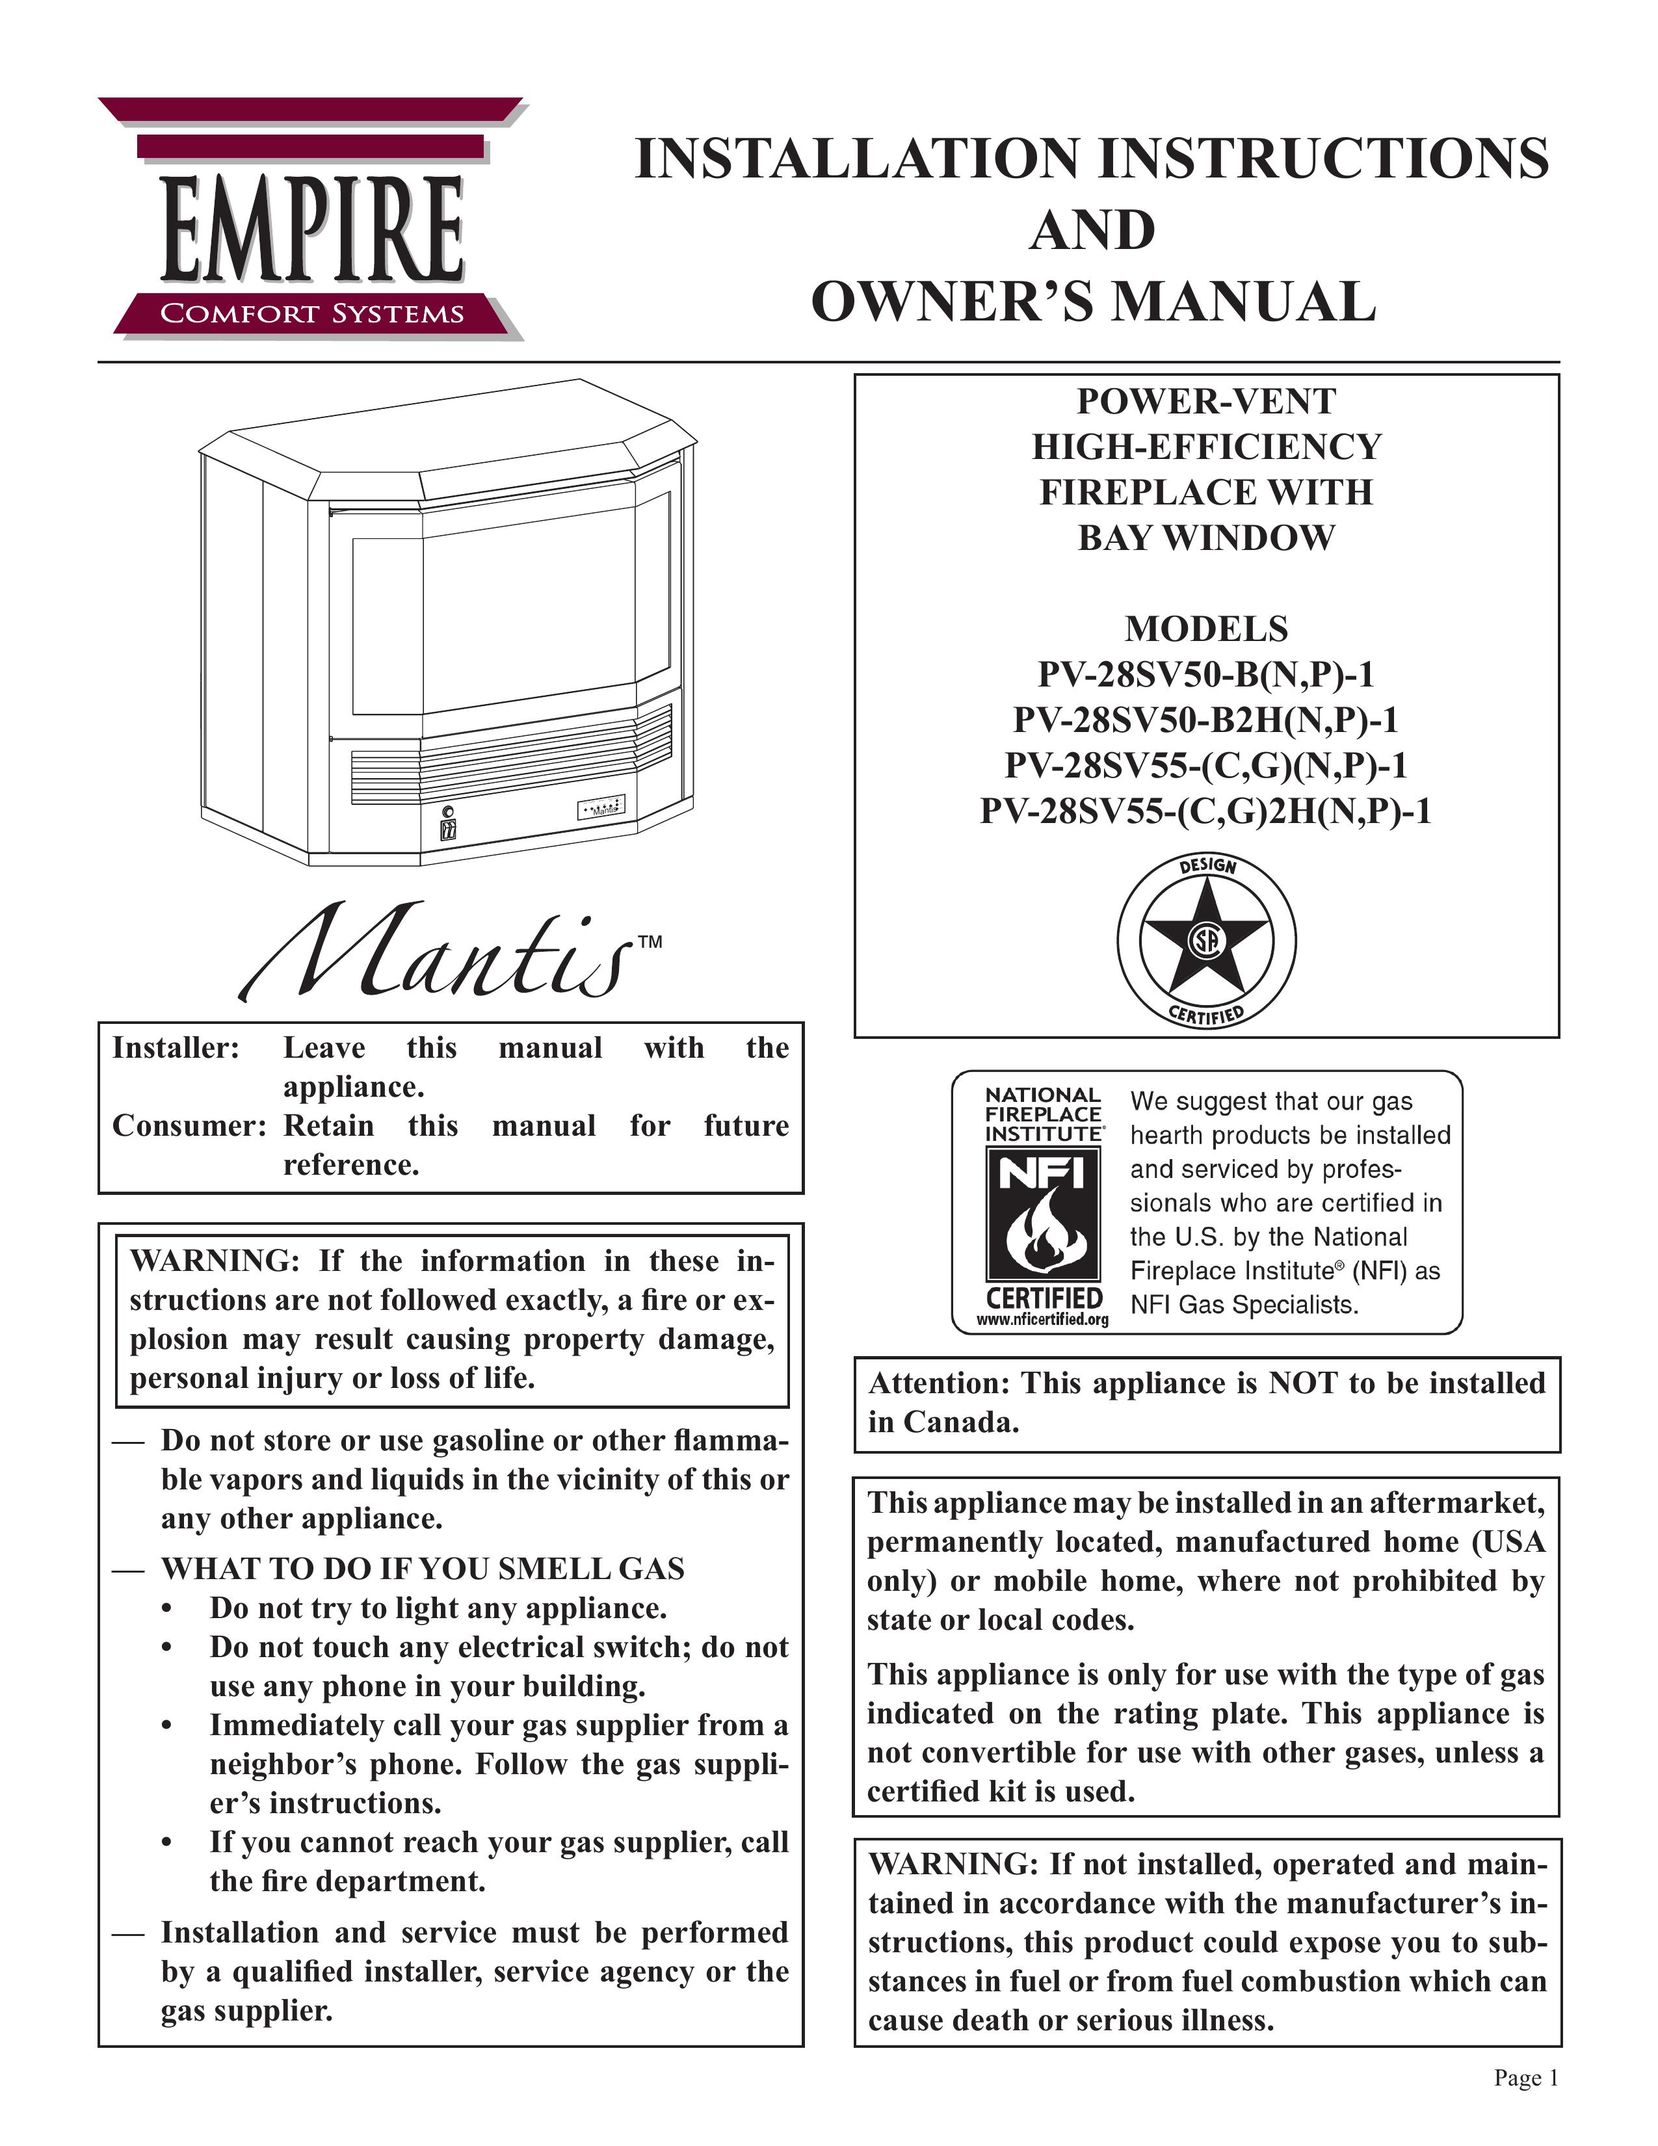 Empire Comfort Systems PV-28SV55-(C,G)(N,P)-1 Indoor Fireplace User Manual